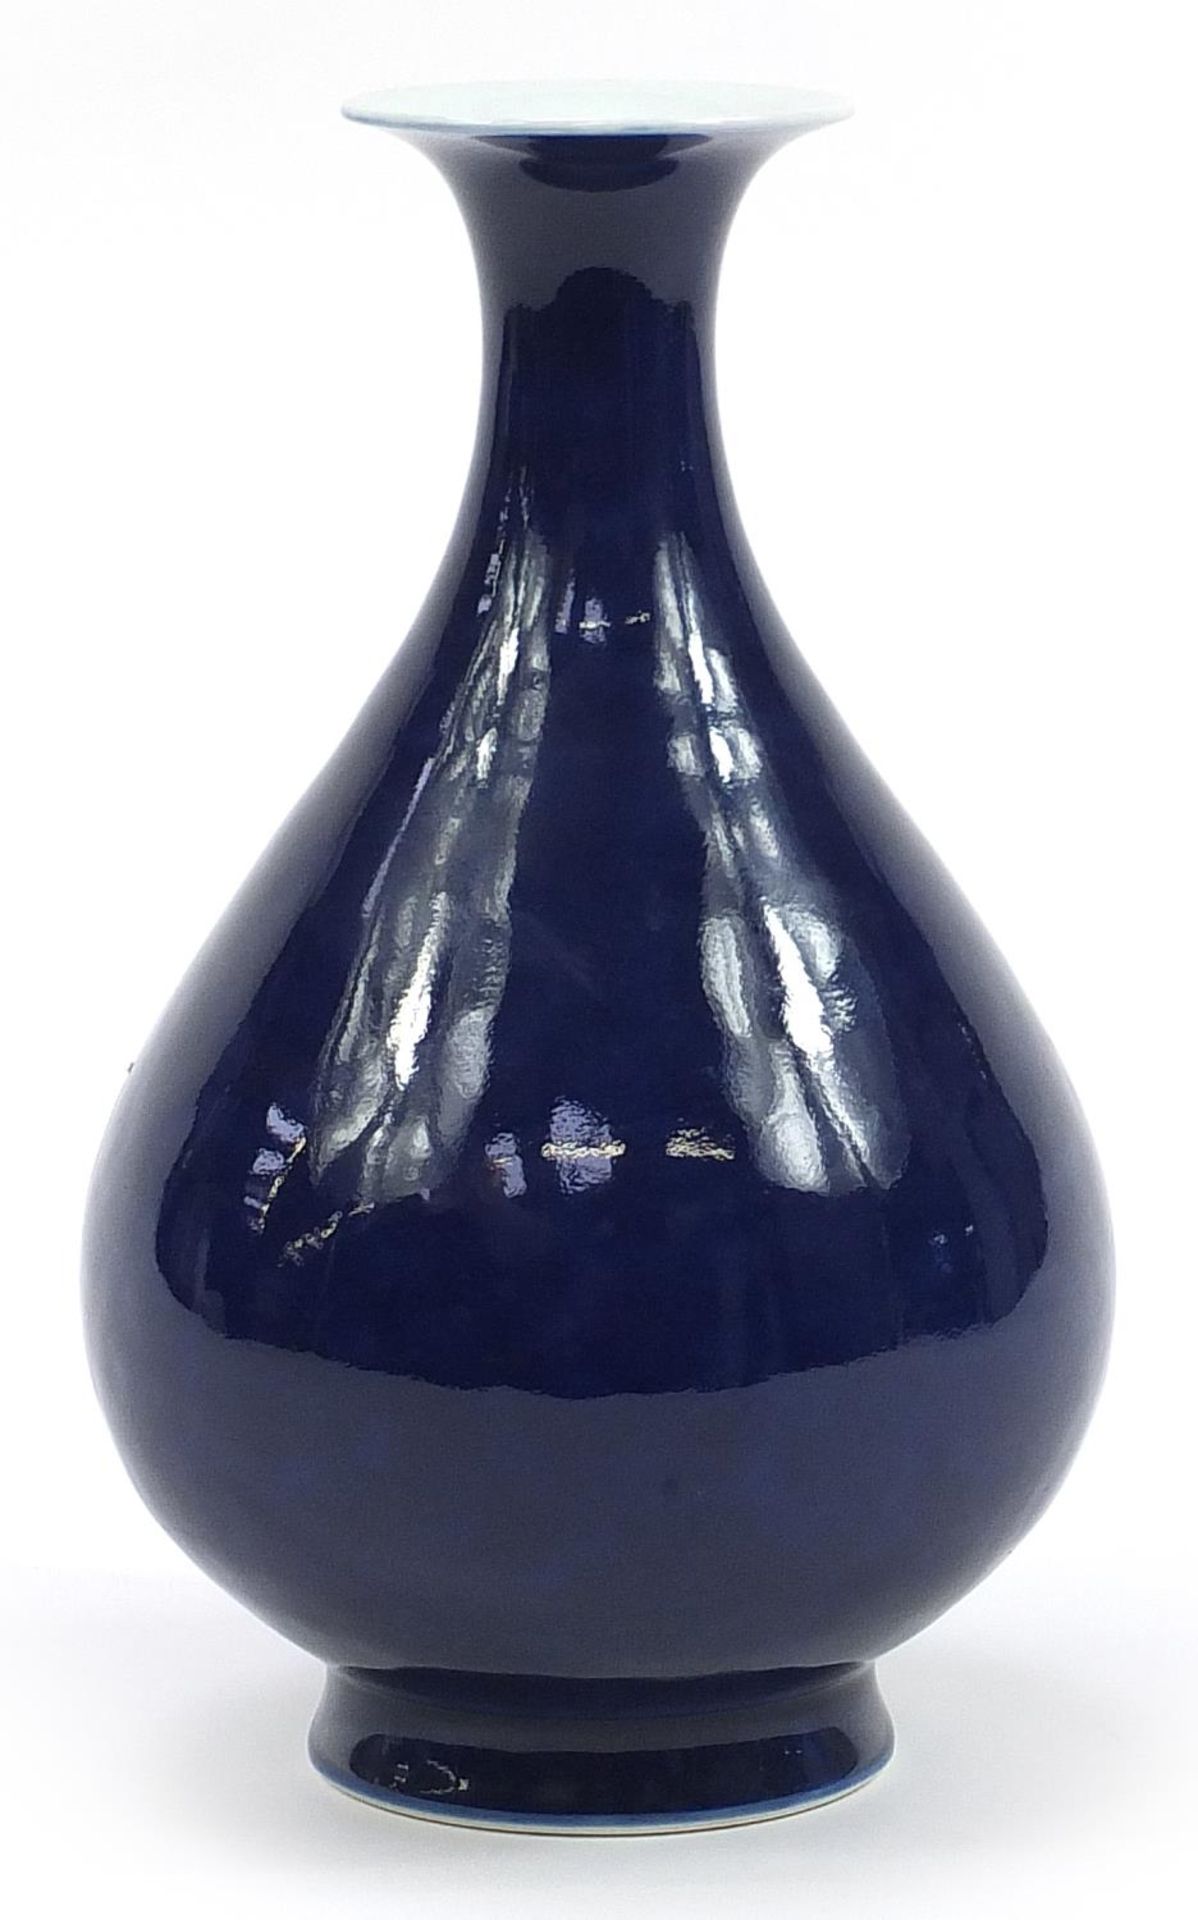 Chinese porcelain vase having a blue glaze, six figure character marks to the base, 31cm high